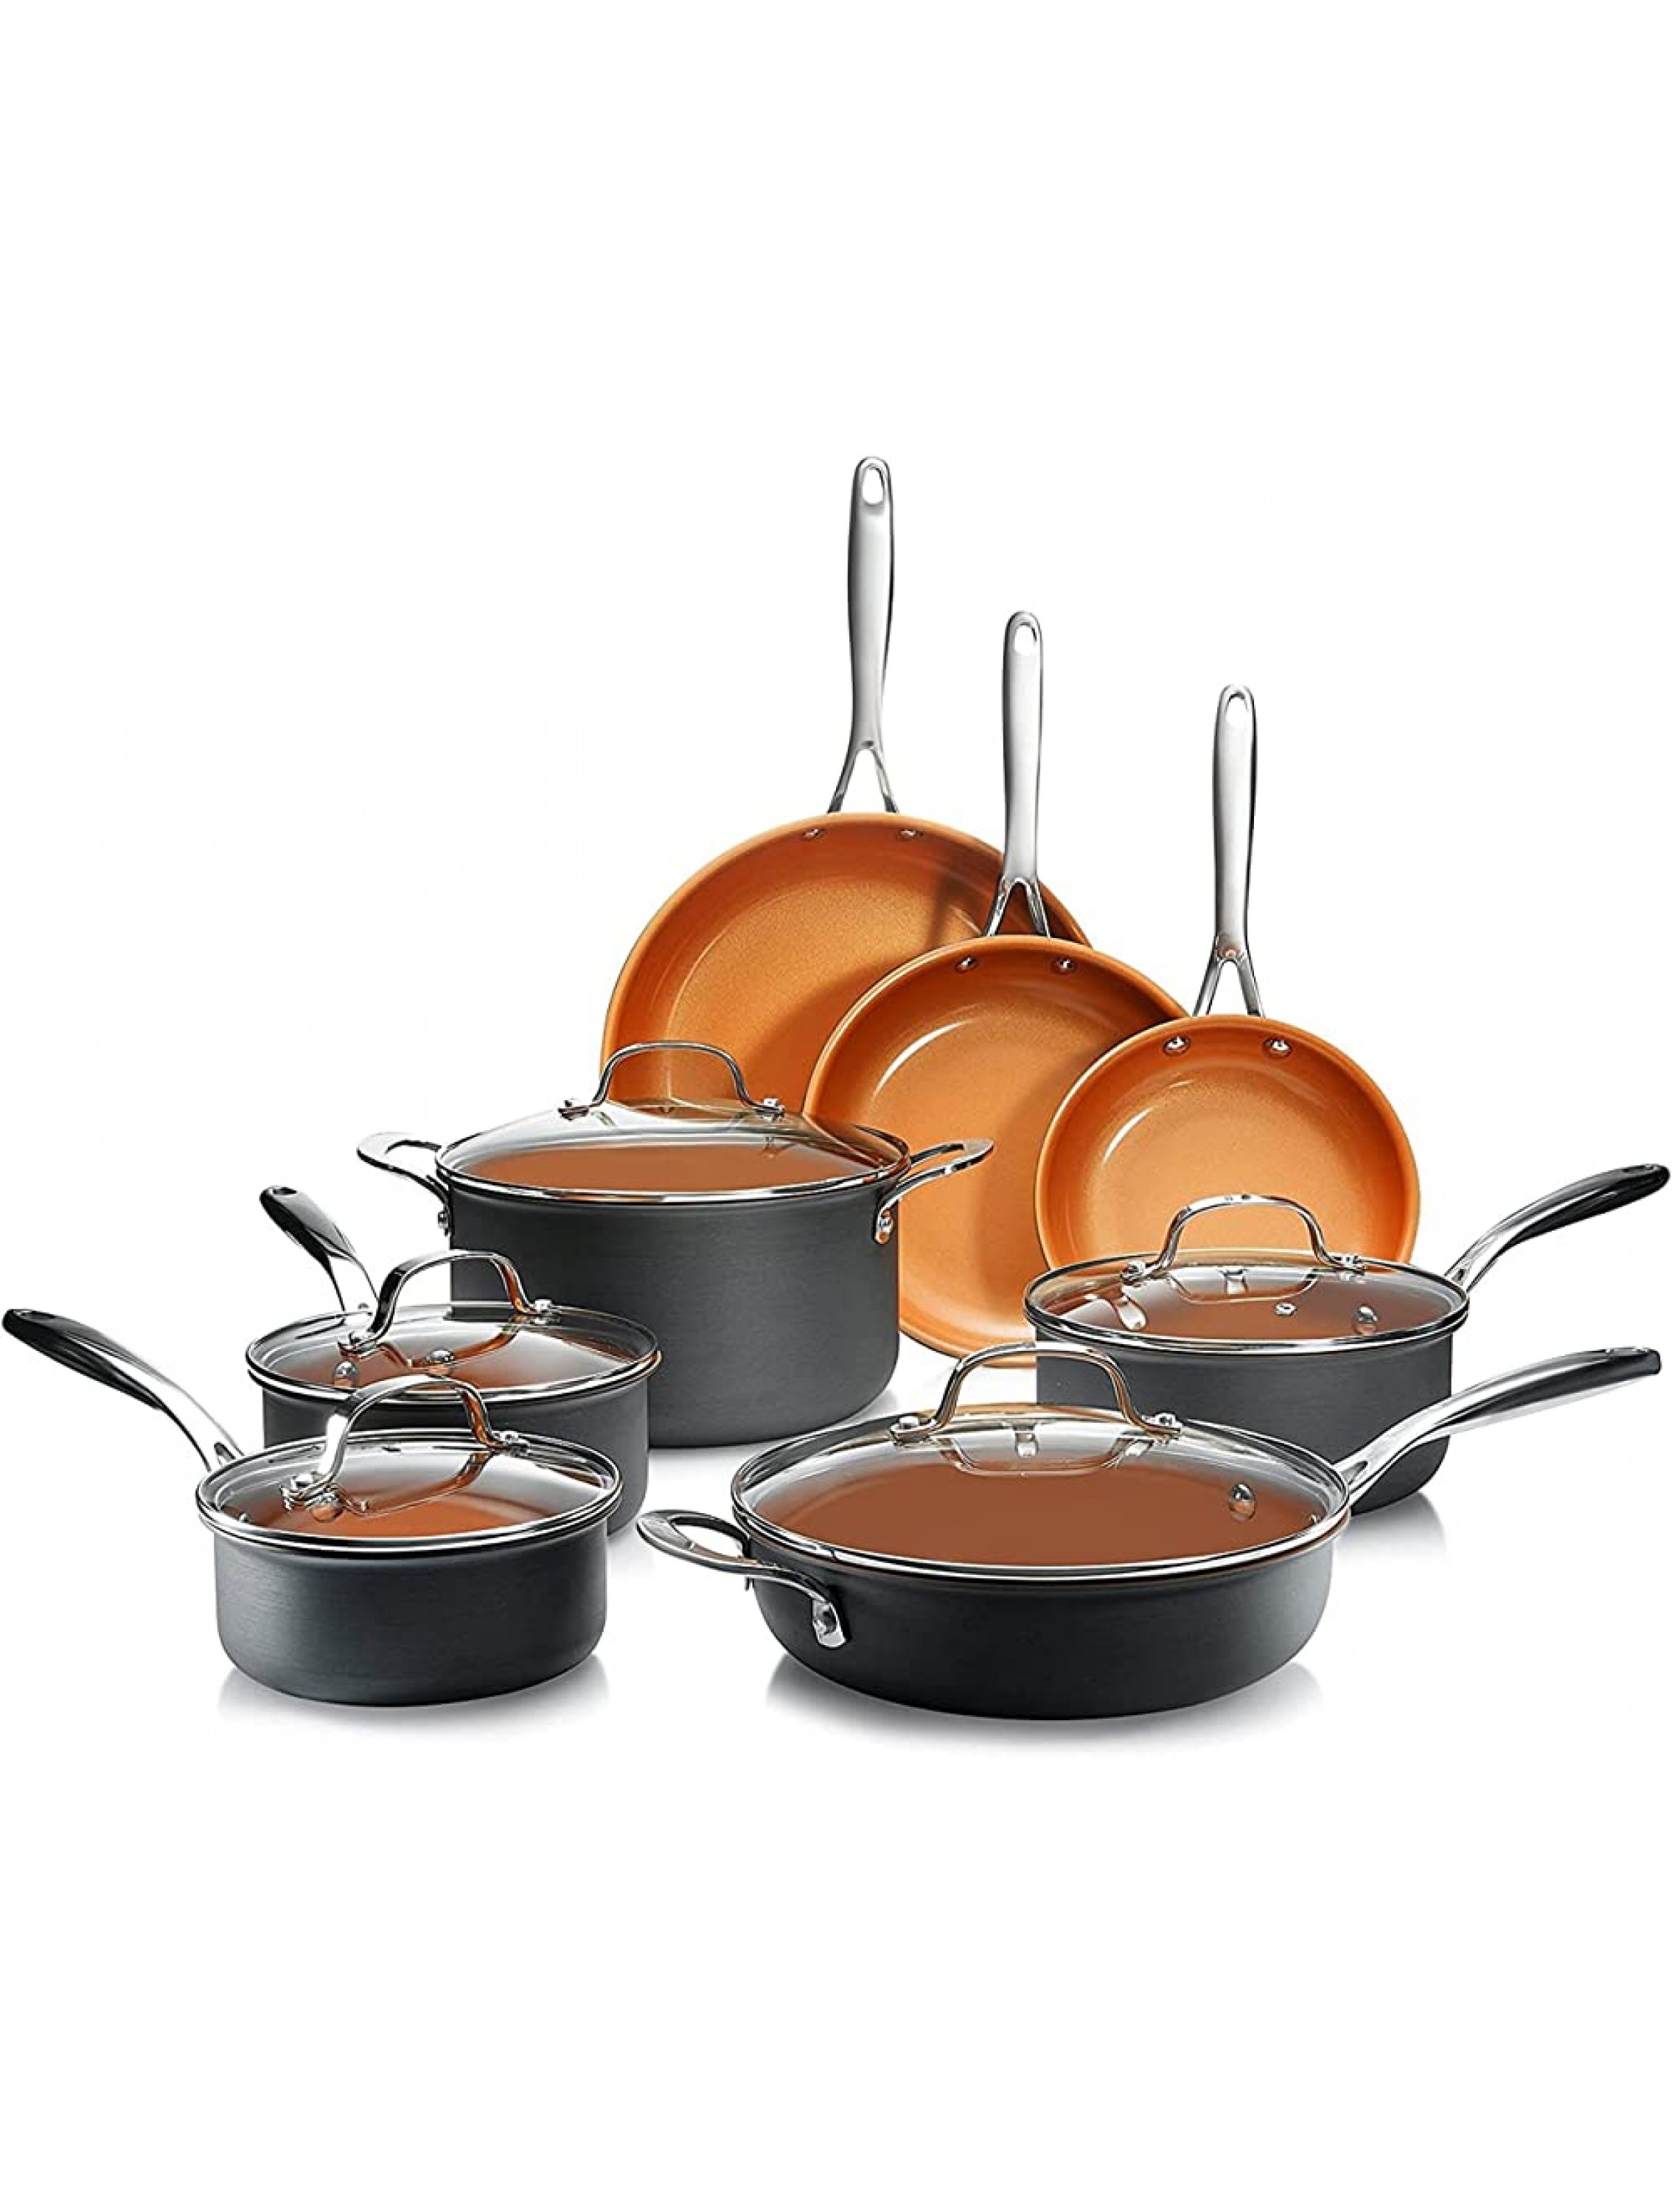 GOTHAM STEEL Pro Hard Anodized Pots and Pans 13 Piece Premium Cookware Set with Ultimate Nonstick Ceramic & Titanium Coating Oven and Dishwasher Safe Brown - BGEKWSABF